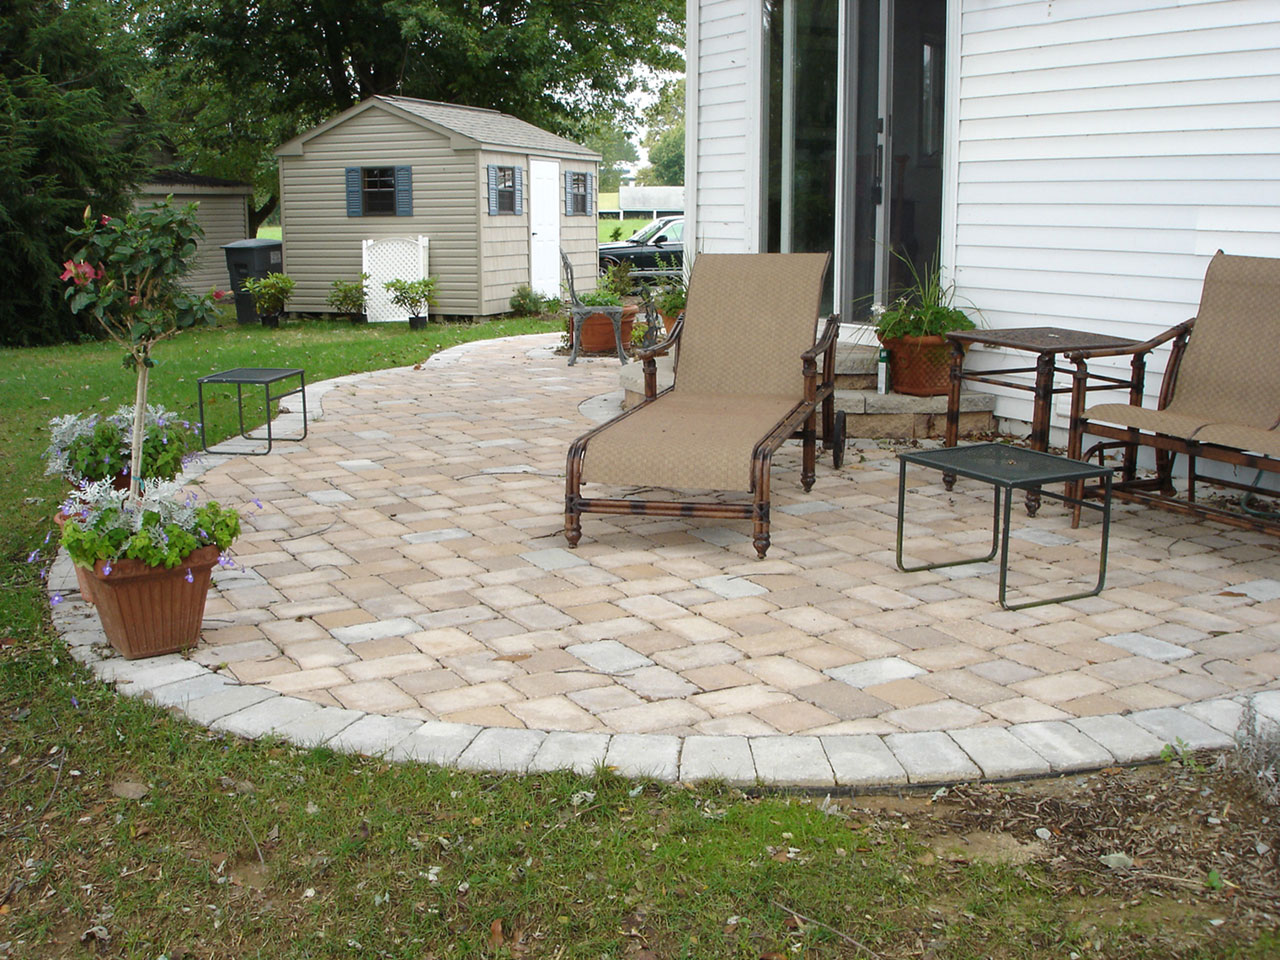 Patio Design Patio Minimalist Patio Design Using Paver Patio Ideas Decorated With Contemporary Style Completed With Patio Furniture Ideas Backyard Paver Patio Ideas For Enchanting Backyard